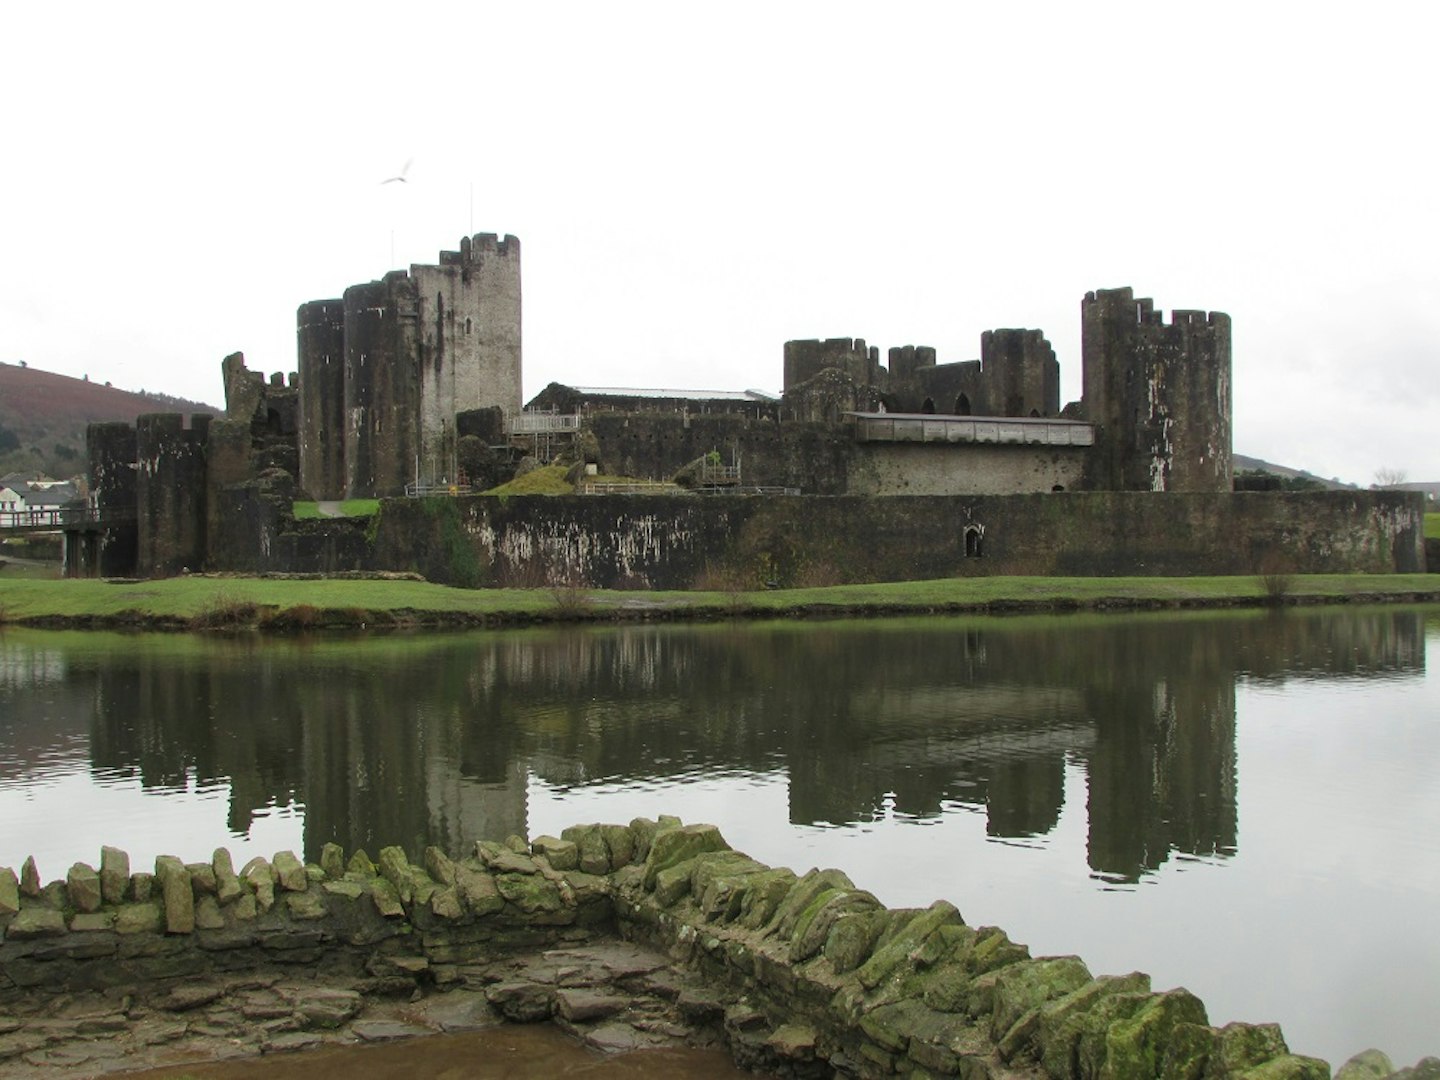 Caerphilly Castle, Caerphilly, South Wales